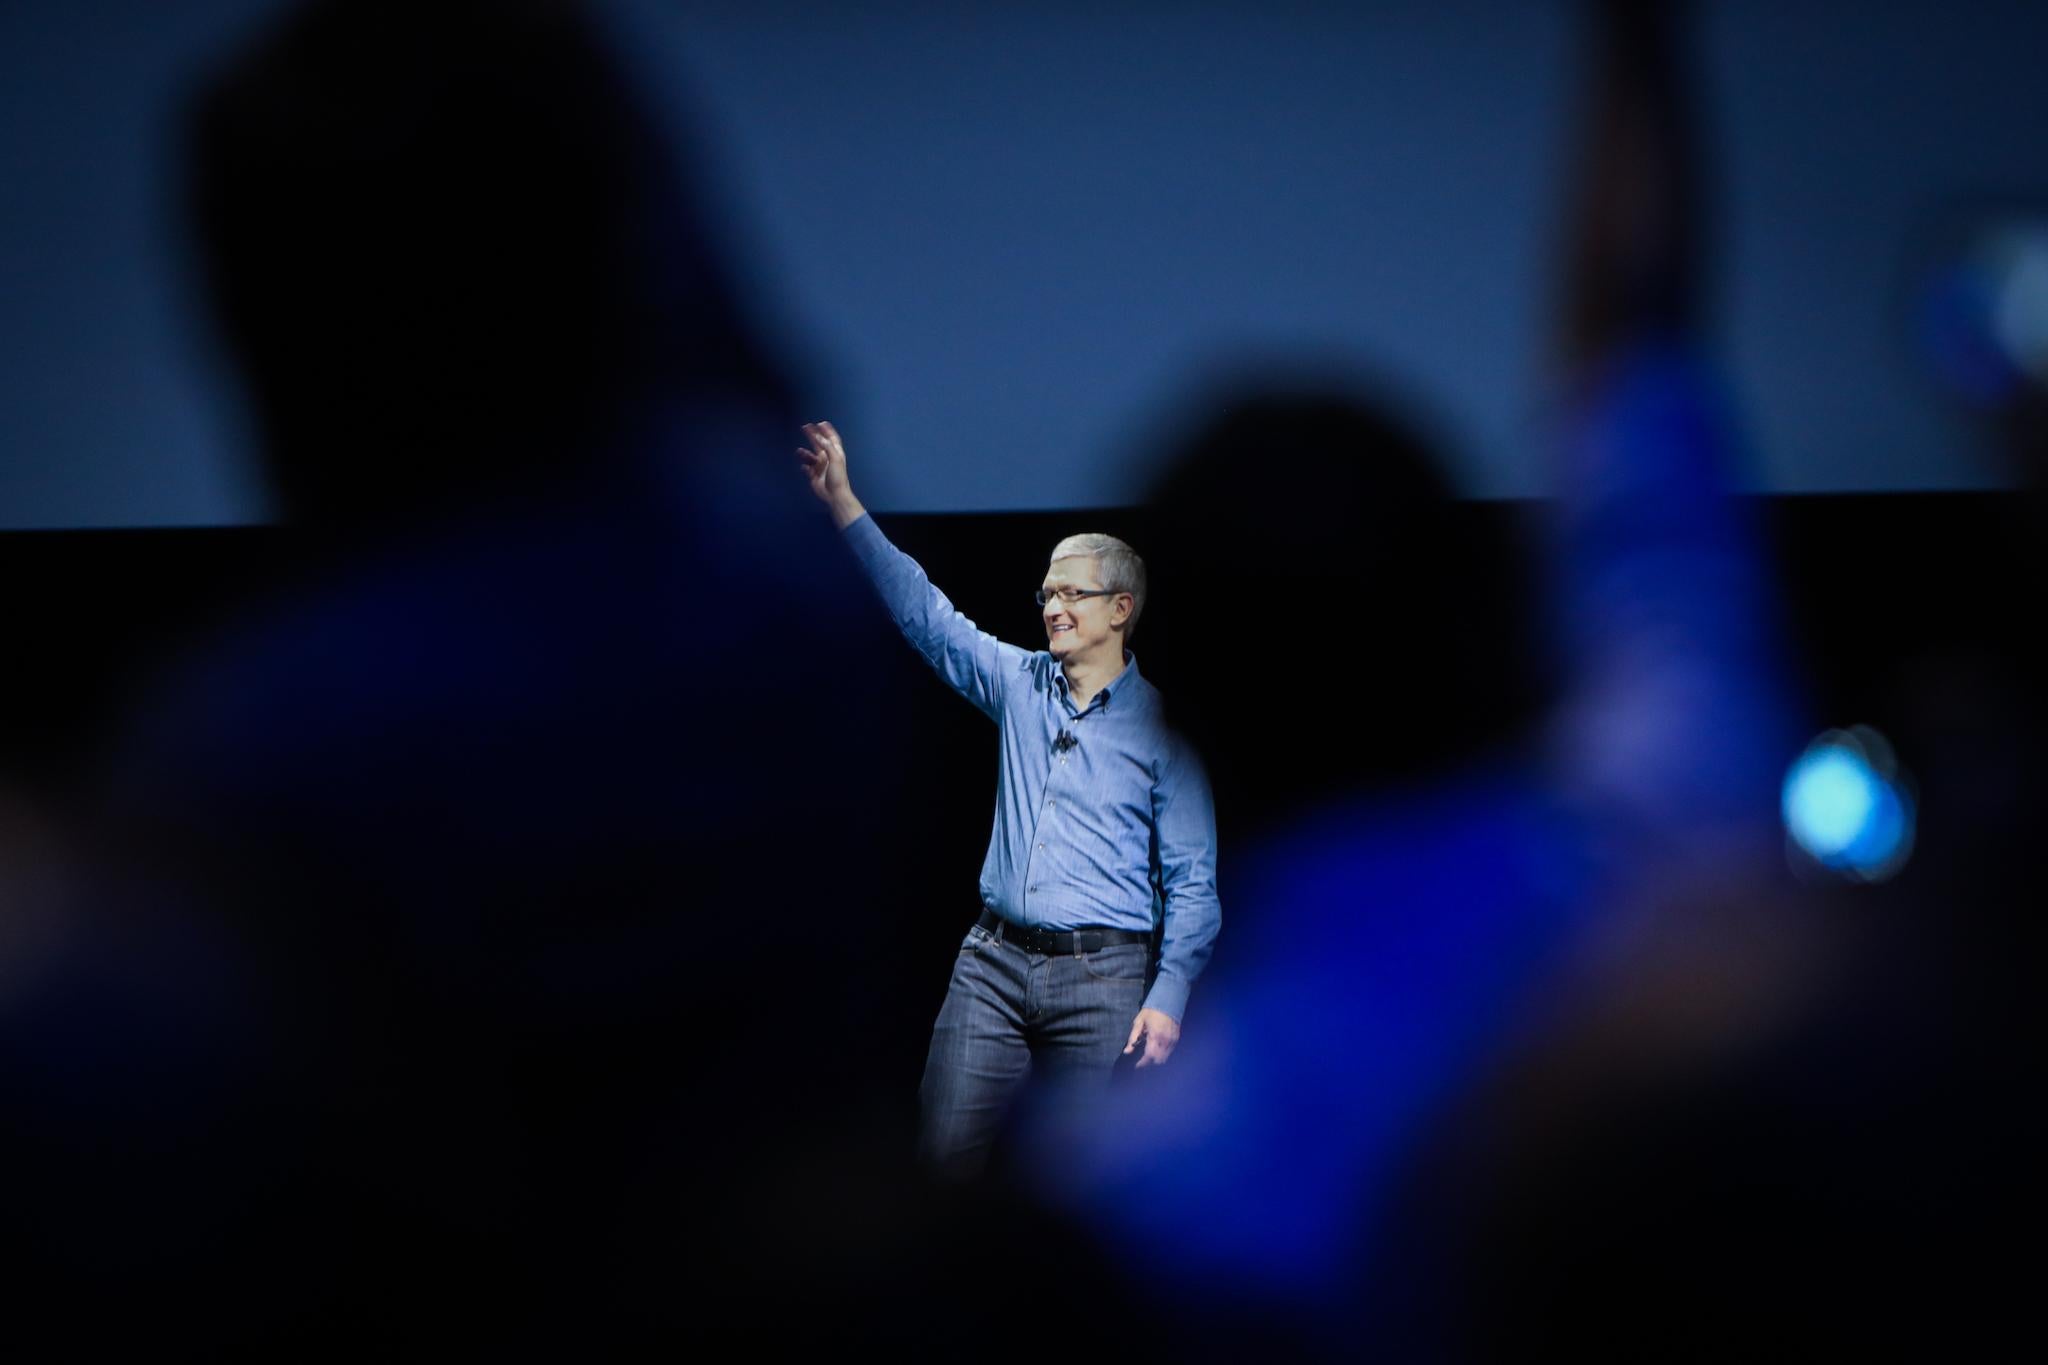 Apple CEO Tim Cook waves to the crowd as takes the stage at Apple's annual Worldwide Developers Conference at the Bill Graham Civic Auditorium in San Francisco, California, onJune 13, 2016